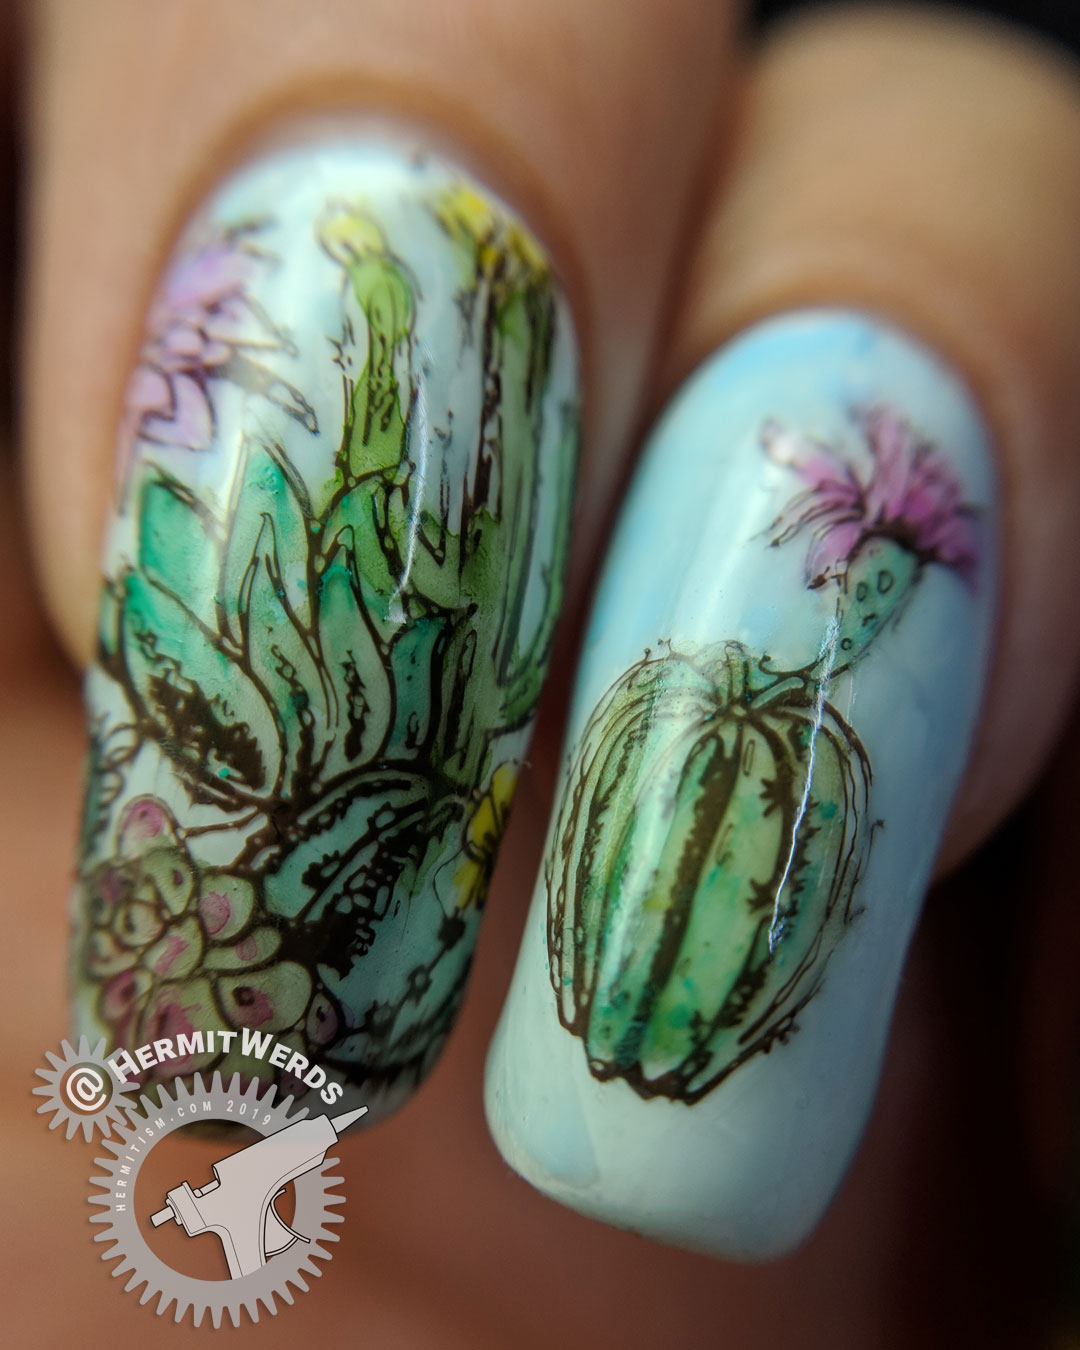 Watercolor Cactus - Hermit Werds - macro shot of nail stamped cactus arrangement colored with watercolor paints